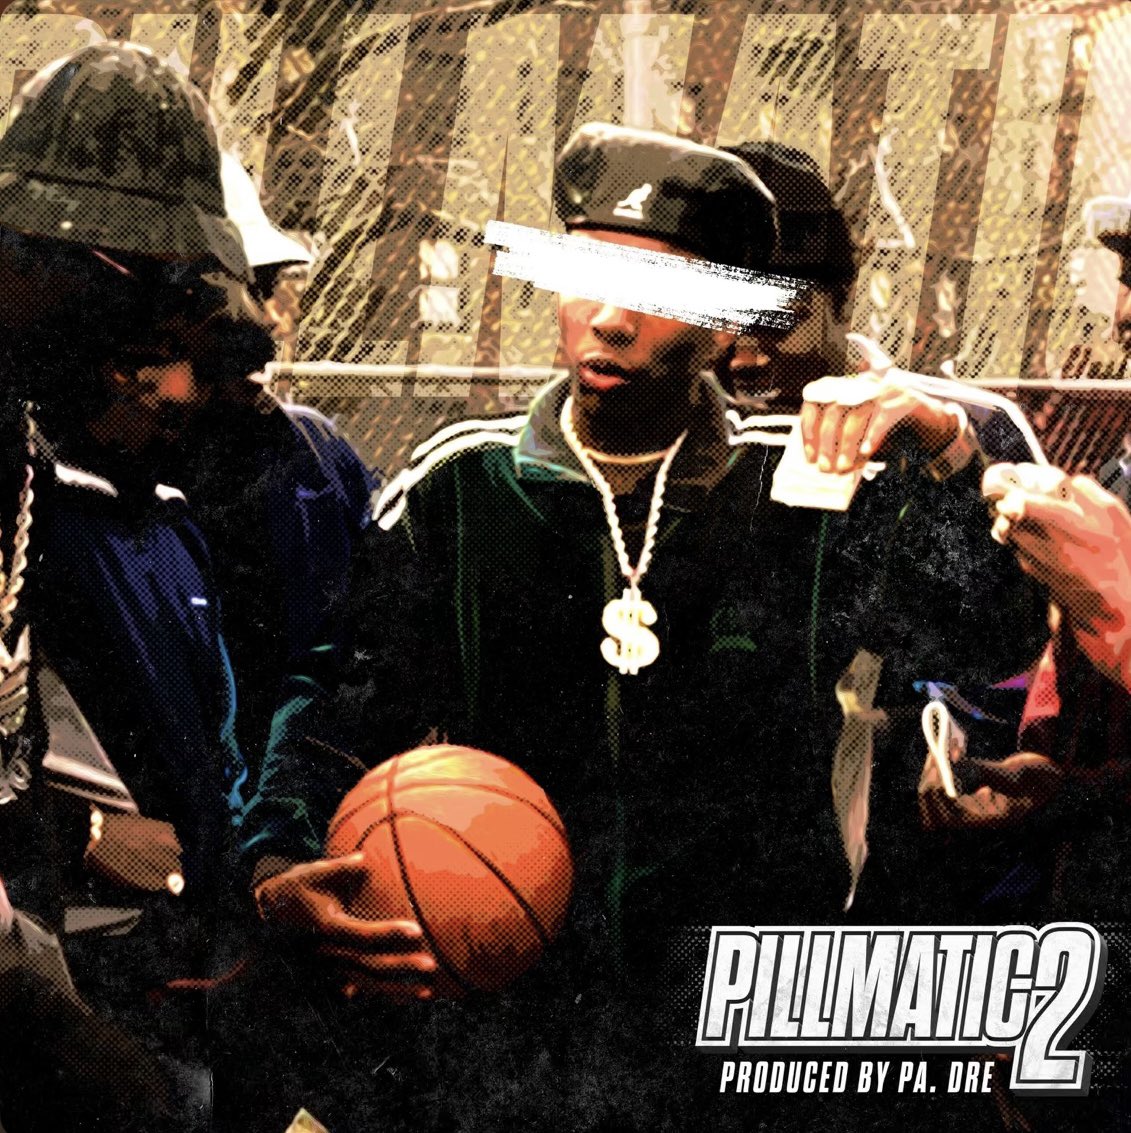 🫡 @GULLYTV1 @Pa_dre_beats #Pillmatic2 🏀🏀 Amazing New Album with a Plethora of Cold MCs ❤️‍🔥❤️‍🔥❤️‍🔥❤️‍🔥